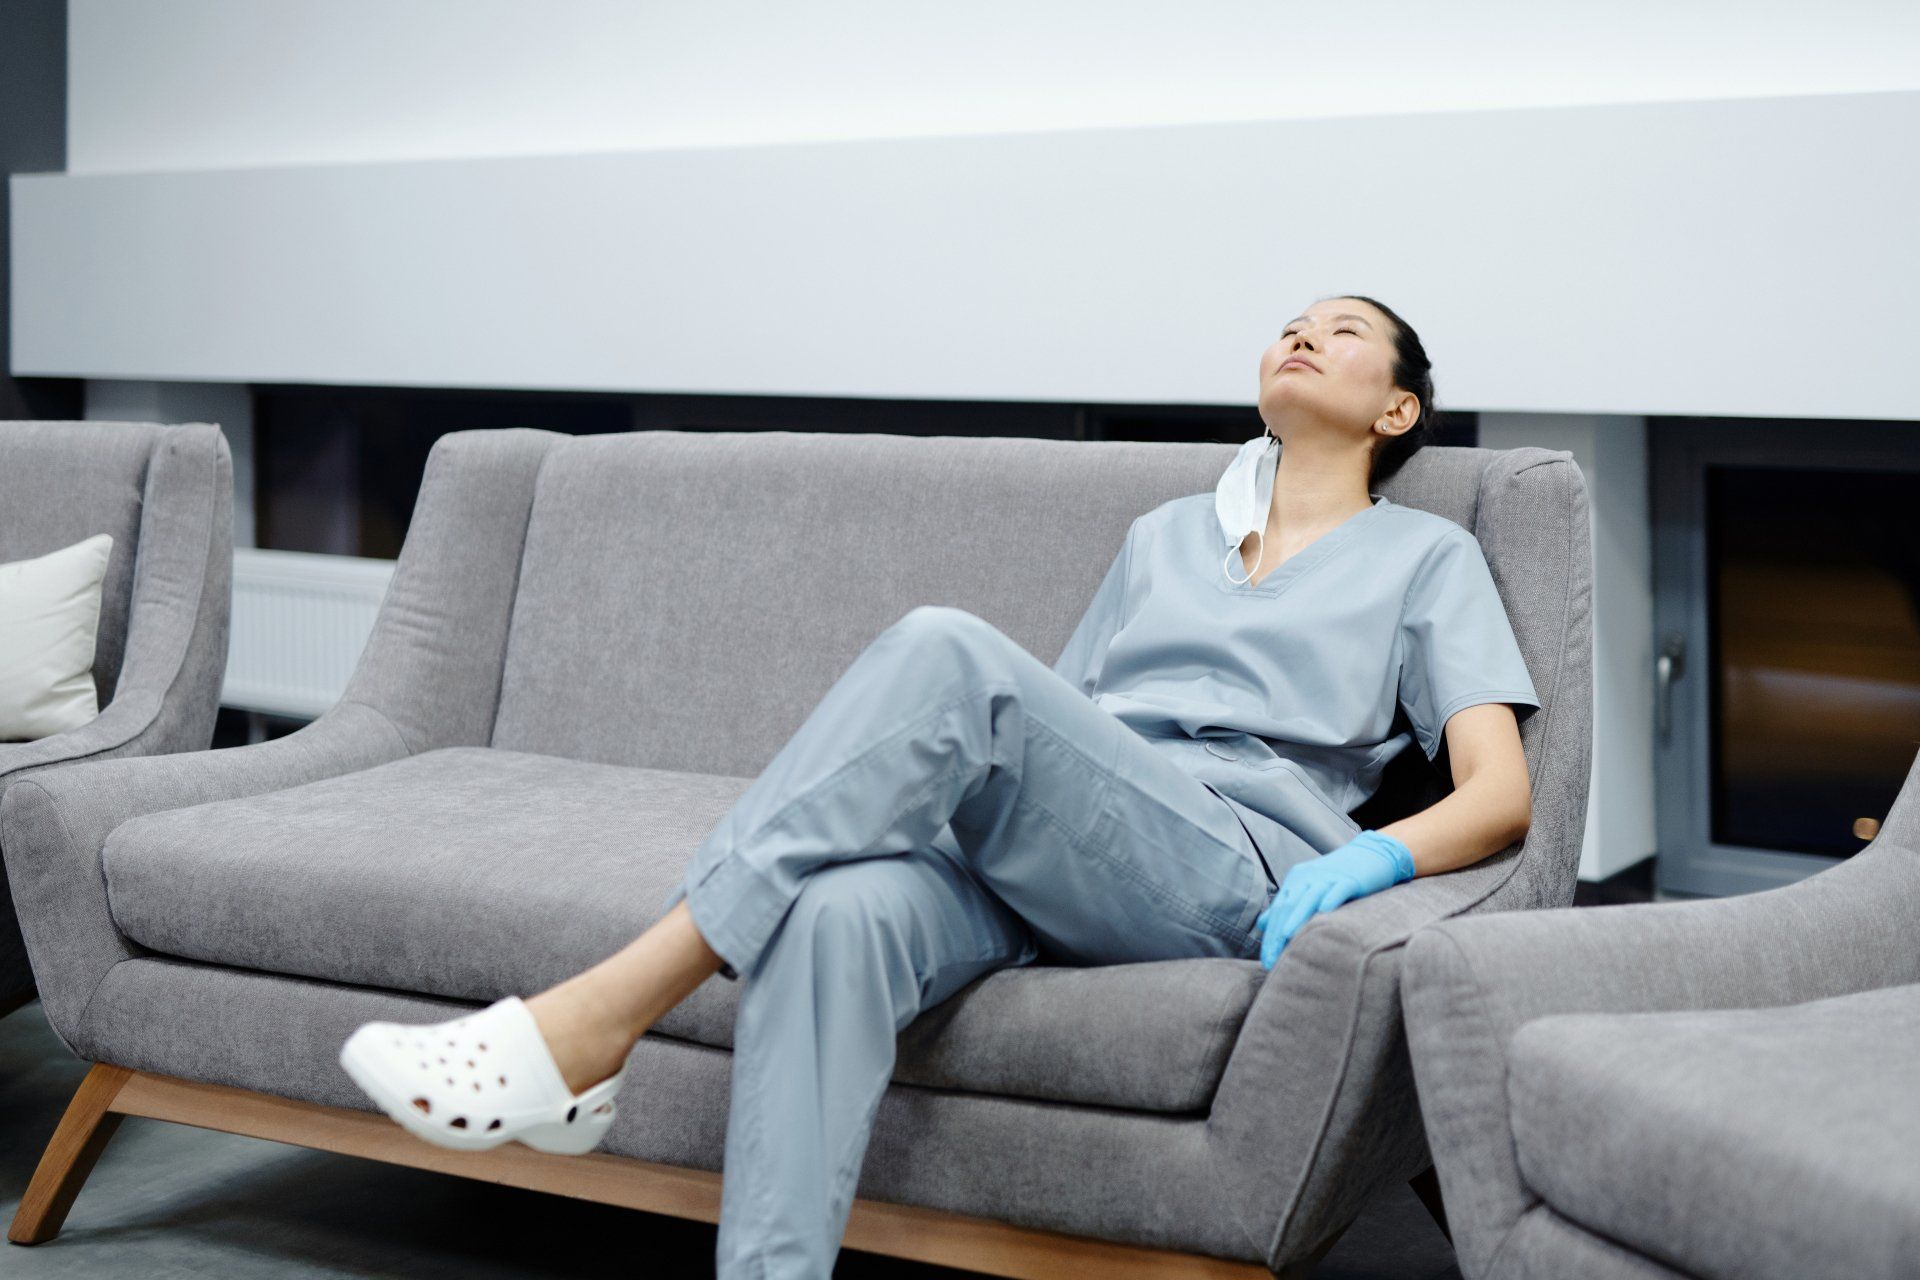 A nurse is sitting on a couch in a hospital waiting room.